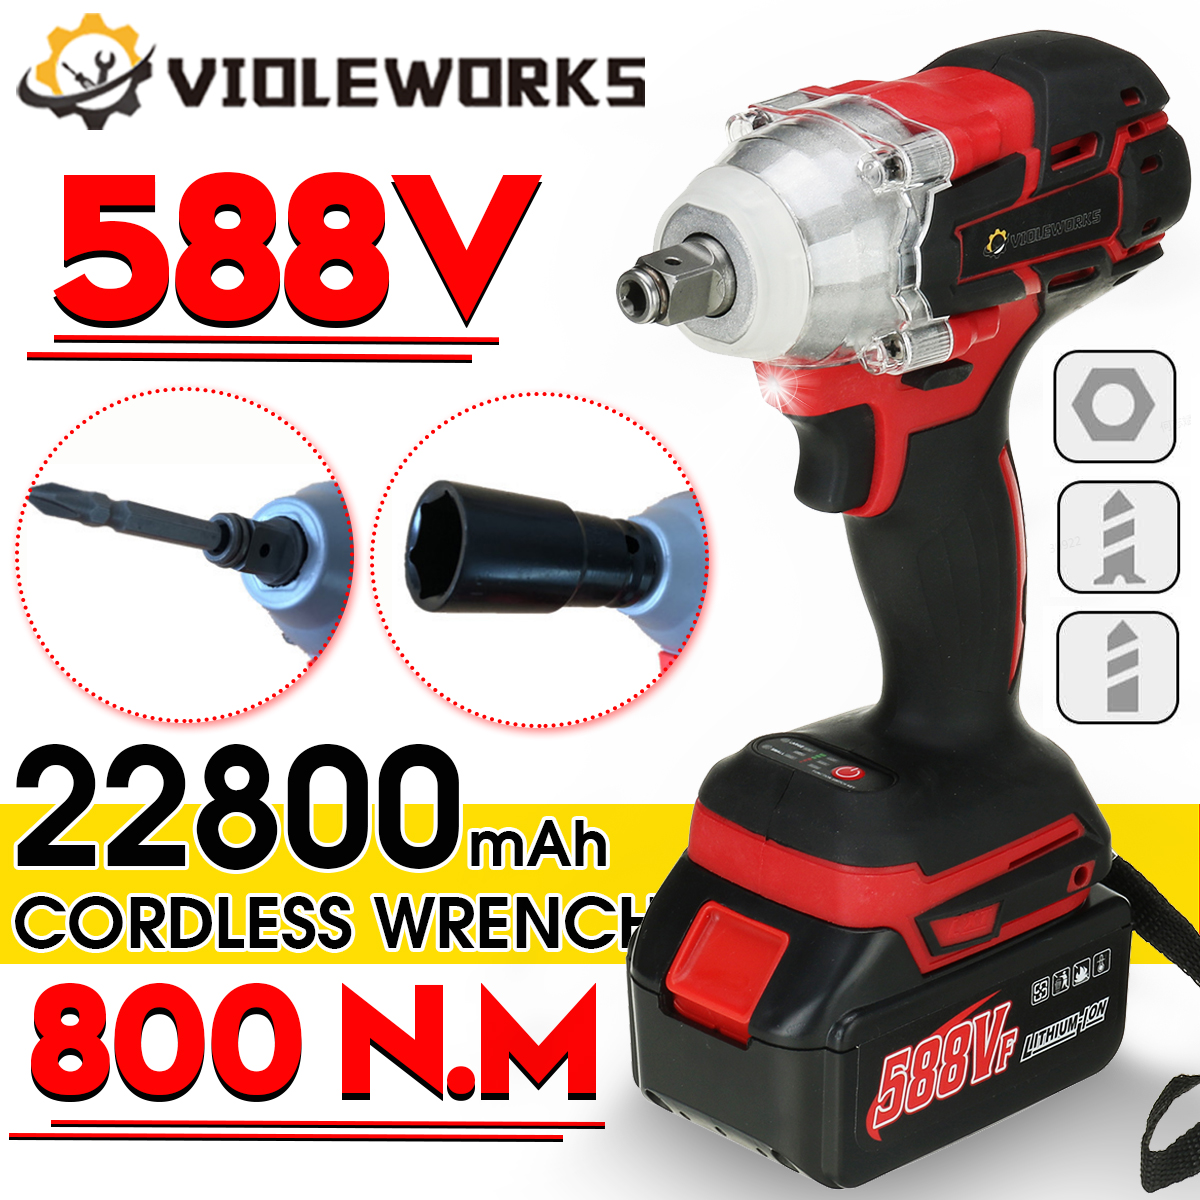 VIOLEWORKS-588VF-2-in-1-Electric-Cordless-Brushless-Impact-Wrench-Driver-Socket-Screwdriver-1823402-3